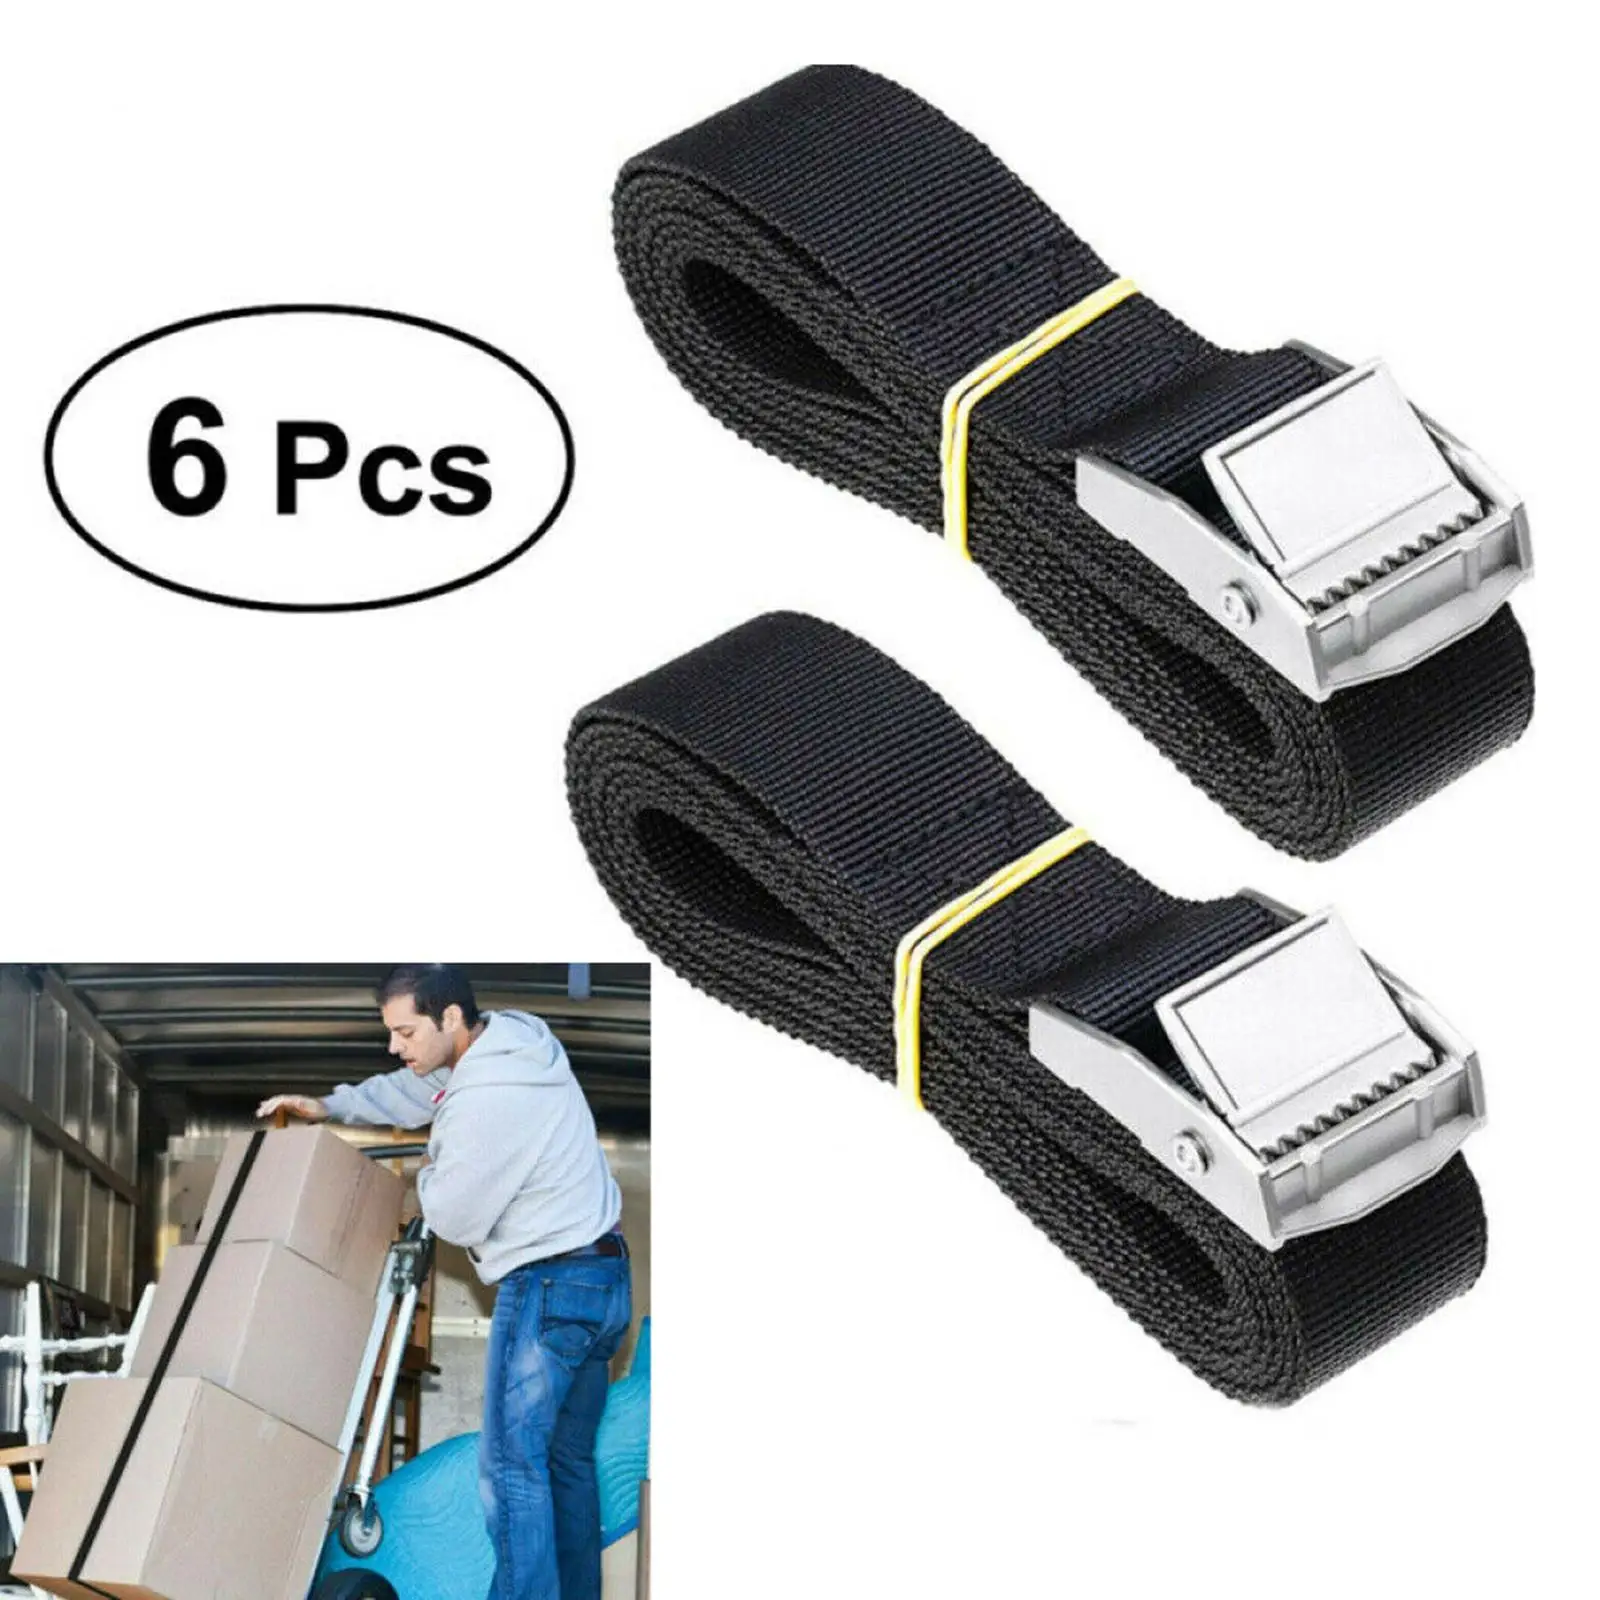 6x Black Lashing Straps with Buckle Lock Buckle Up to 330lbs for